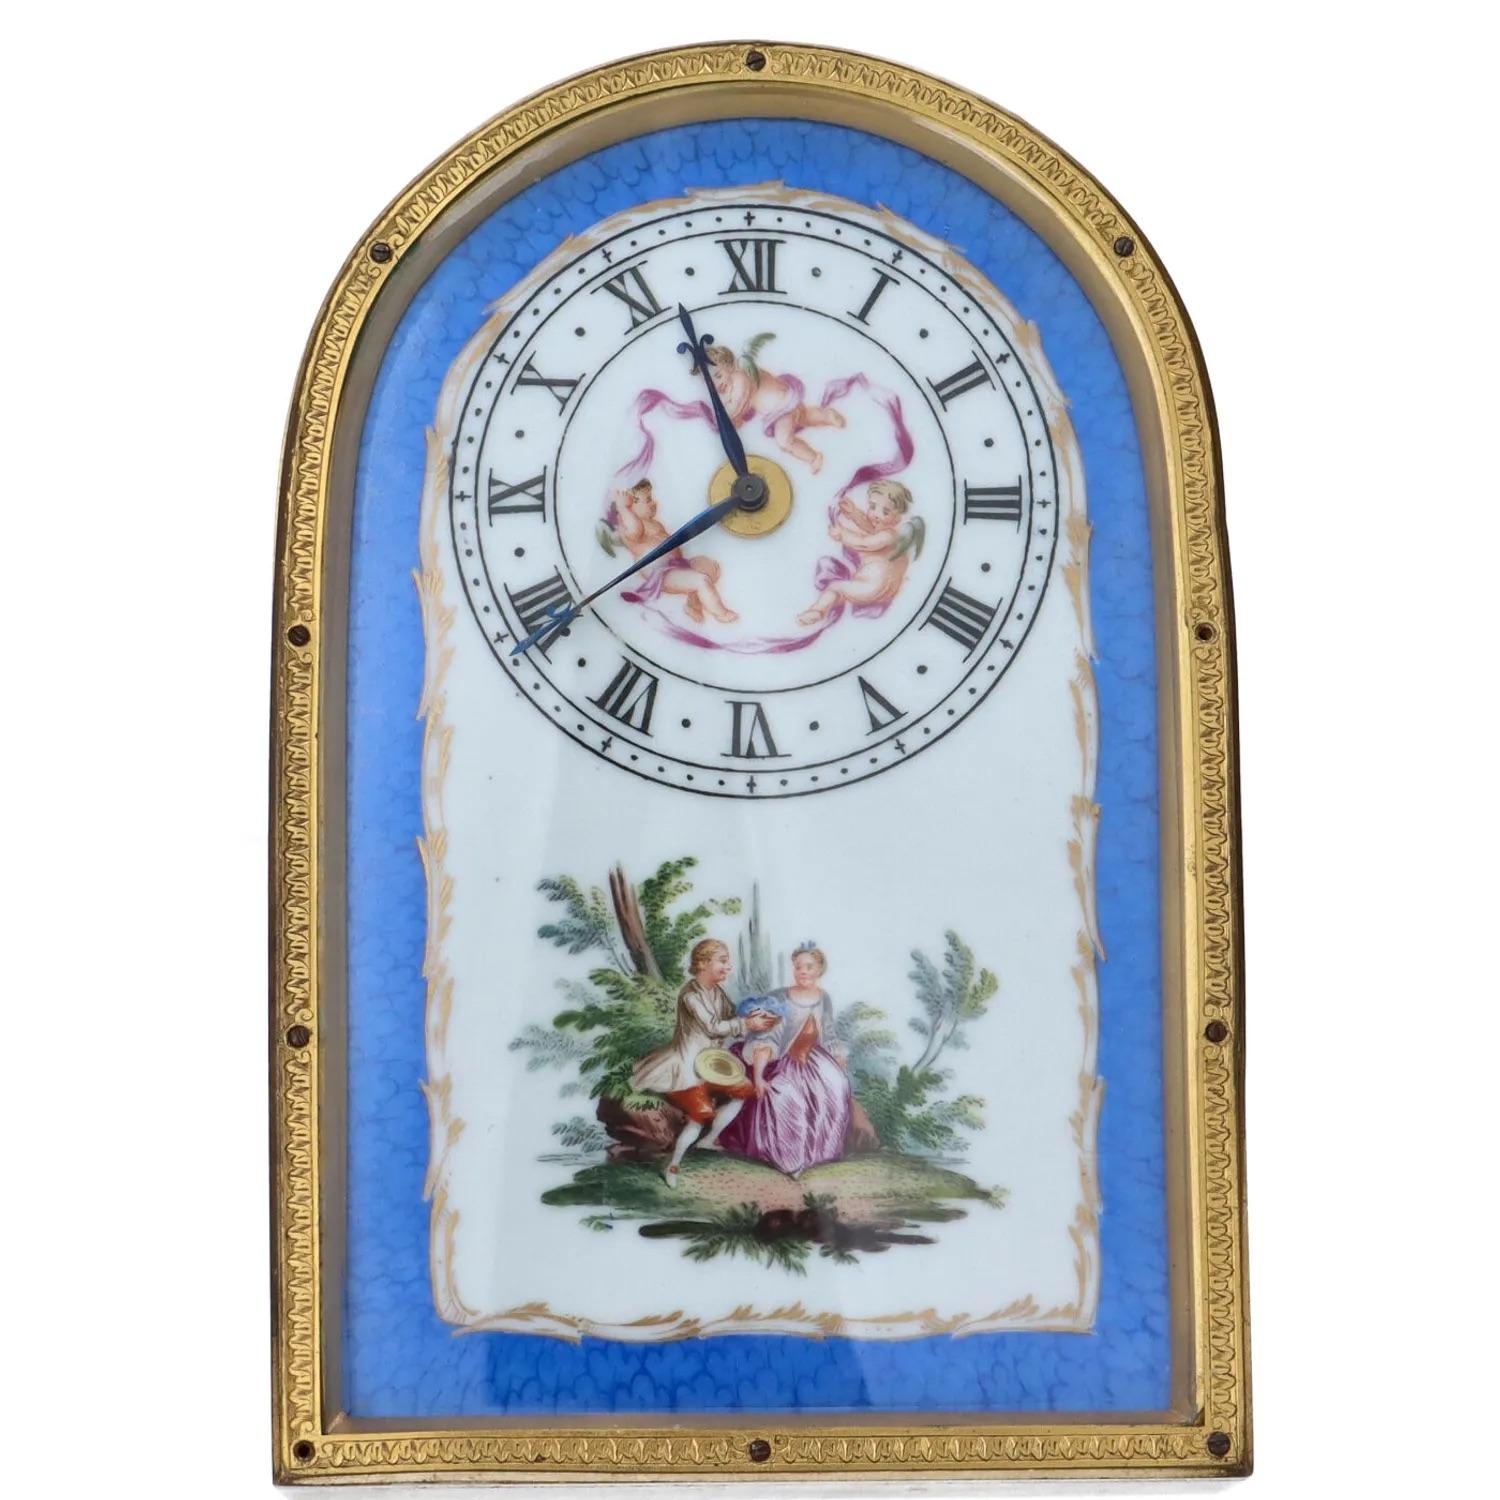 The strut clock of rectangular form with a domed top mounted in ormolu with beautifully engraved scrollwork to the sides and top. The clock fitted with a heavily engineered bracket to ensure it stands stable upon any surface. The glazed front